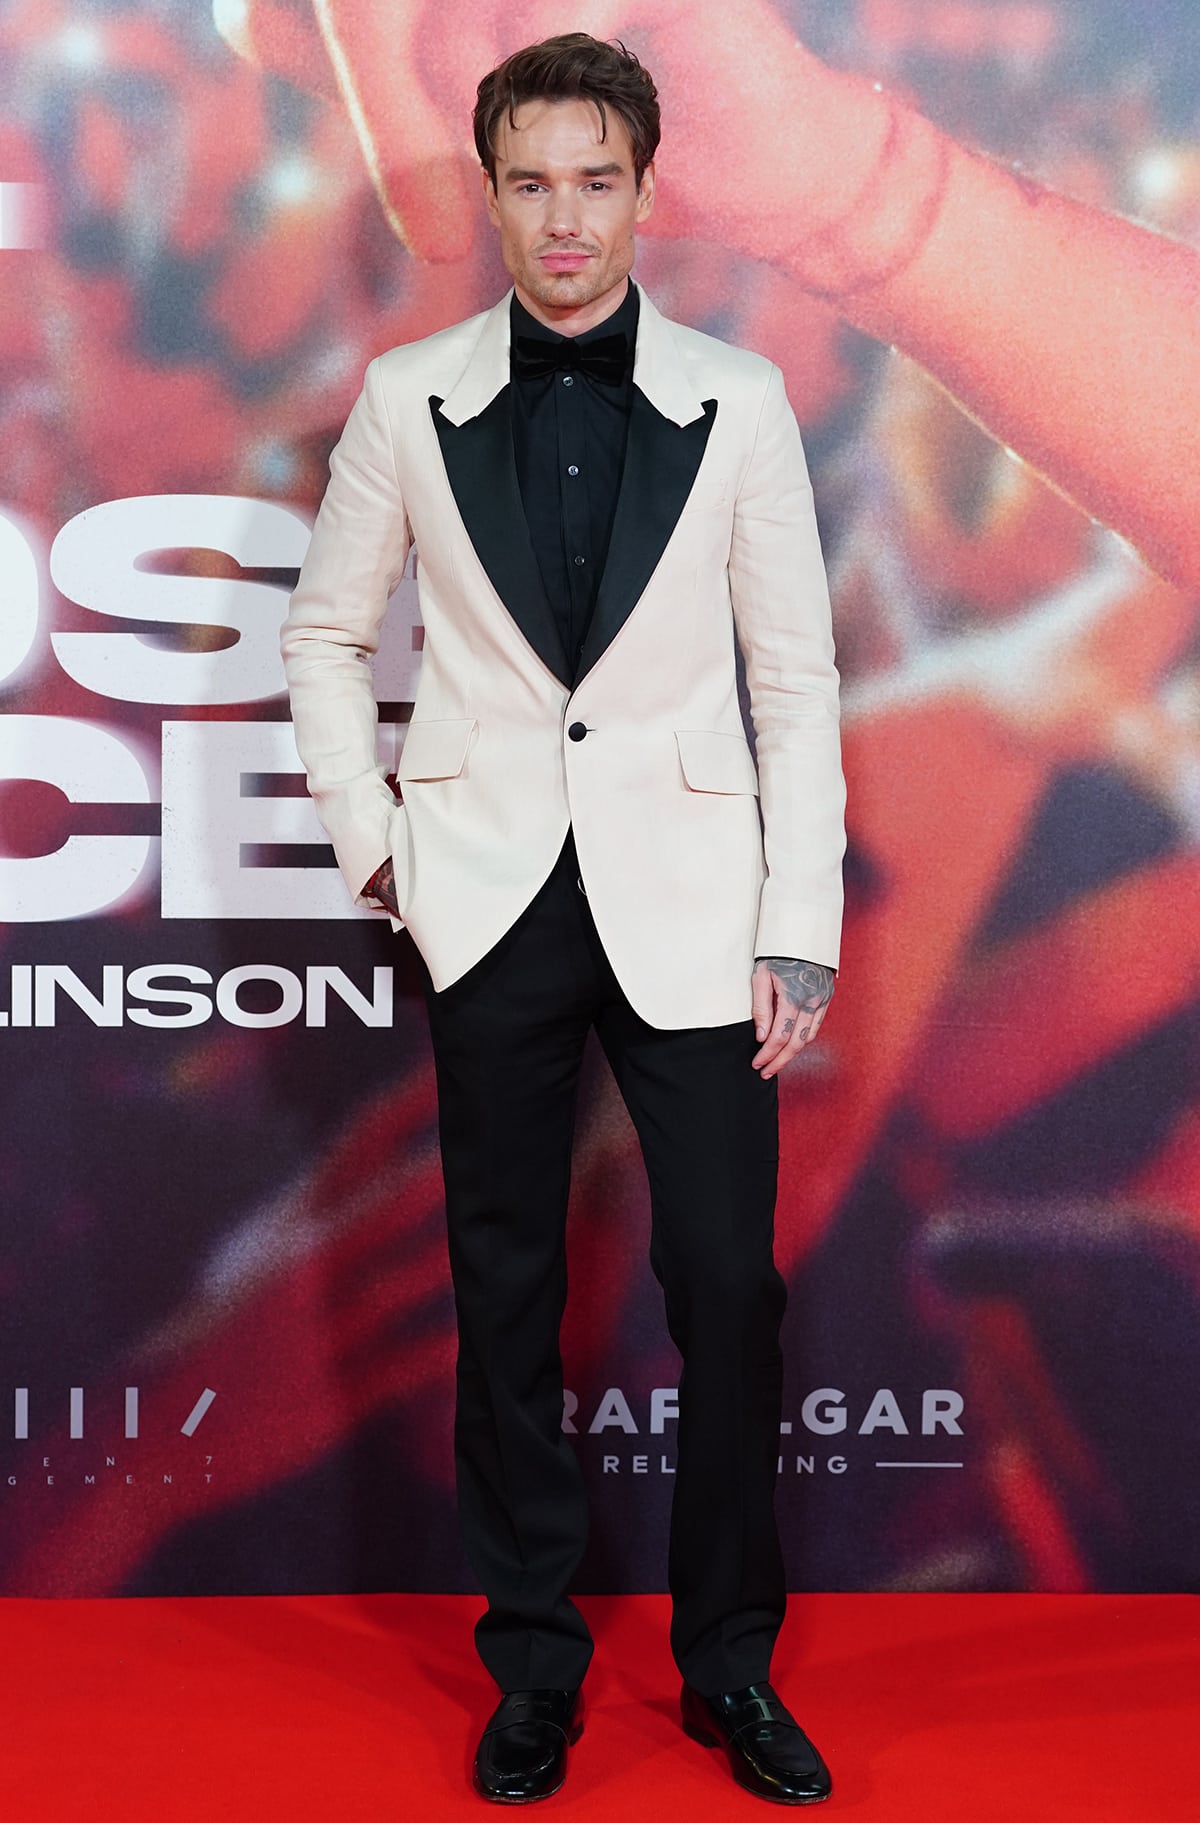 Liam Payne shocks fans with his noticeable transformation at the London premiere of Louis Tomlinson's documentary All of Those Voices at Cineworld Leicester Square on March 16, 2023